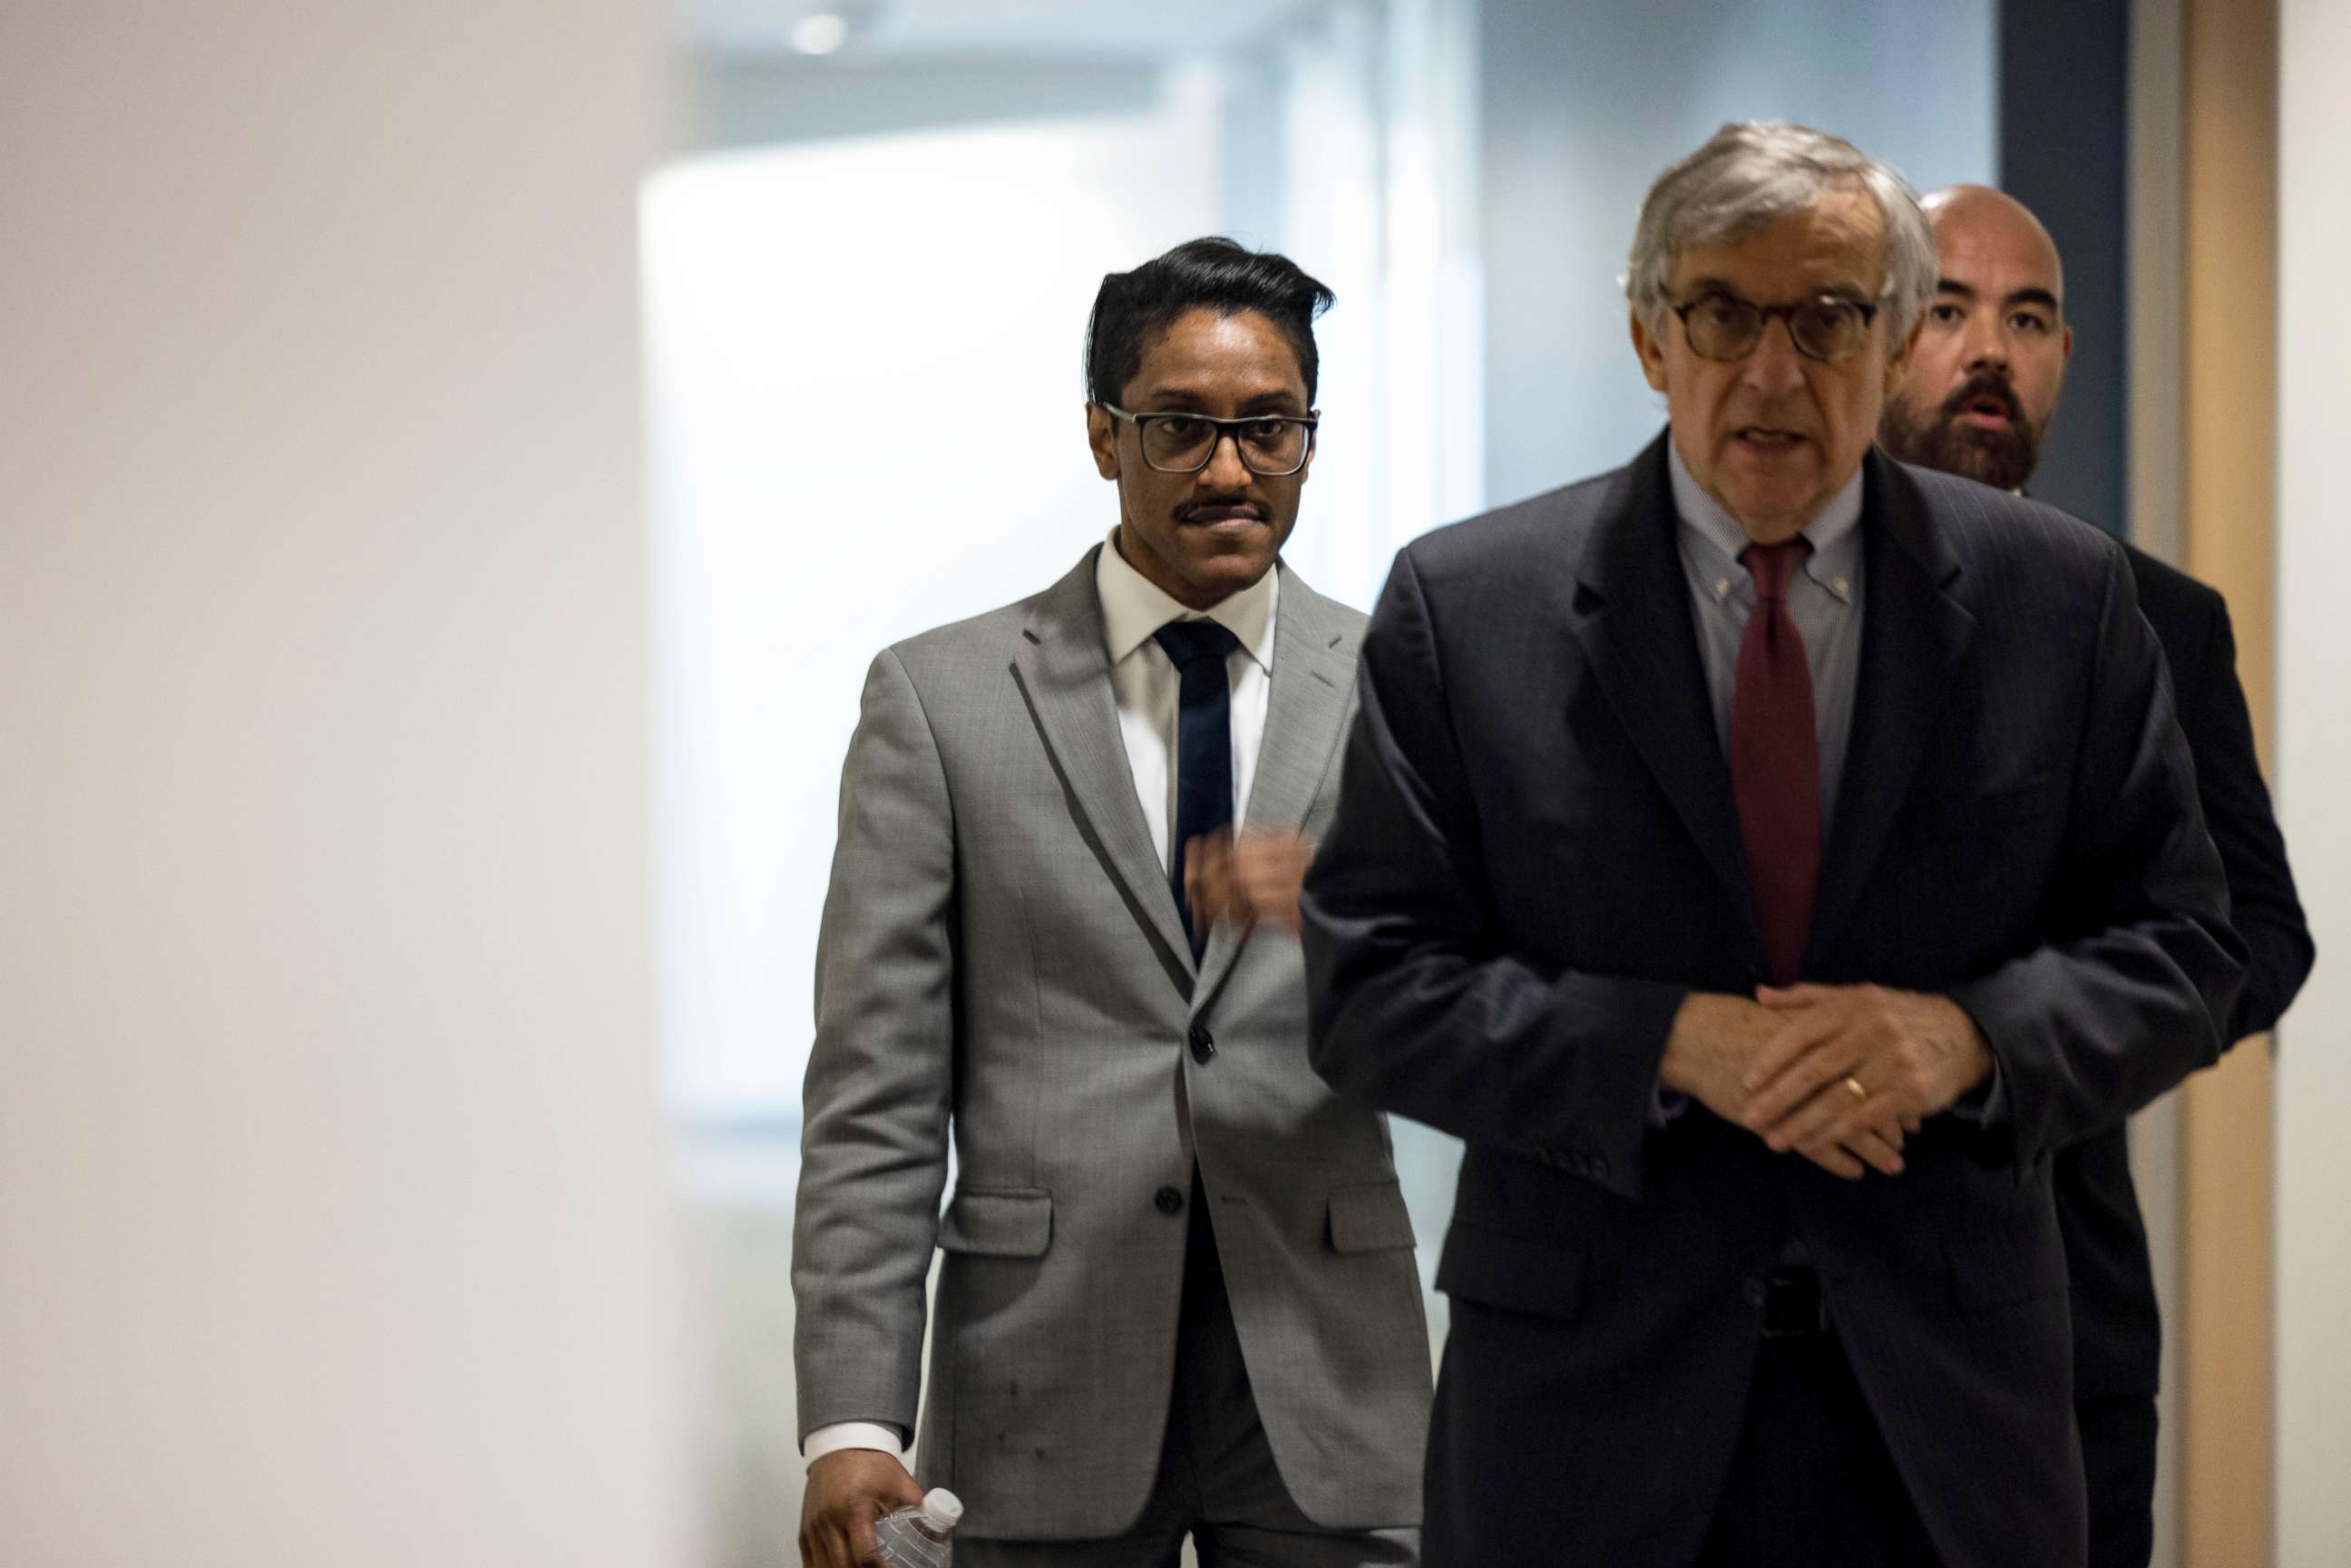 PHOTO: Stop the Steal organizer Ali Alexander, left, returns to a conference room for a deposition meeting on Capitol Hill with the House select committee investigating the January 6th attack, Dec. 9, 2021 in Washington, DC.